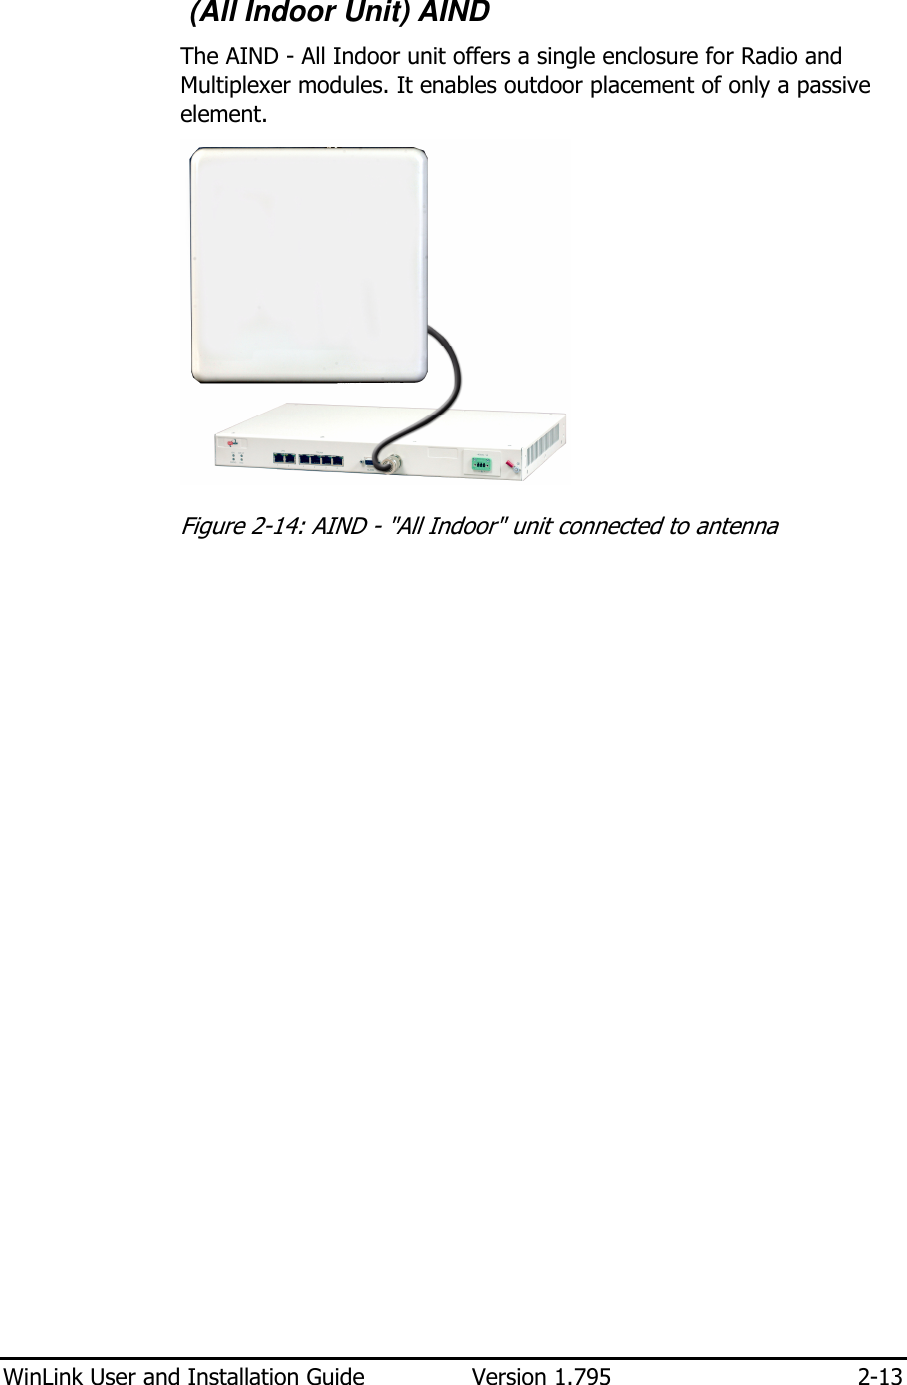  WinLink User and Installation Guide  Version 1.795  2-13   (All Indoor Unit) AIND The AIND - All Indoor unit offers a single enclosure for Radio and Multiplexer modules. It enables outdoor placement of only a passive element.  Figure  2-14: AIND - &quot;All Indoor&quot; unit connected to antenna 